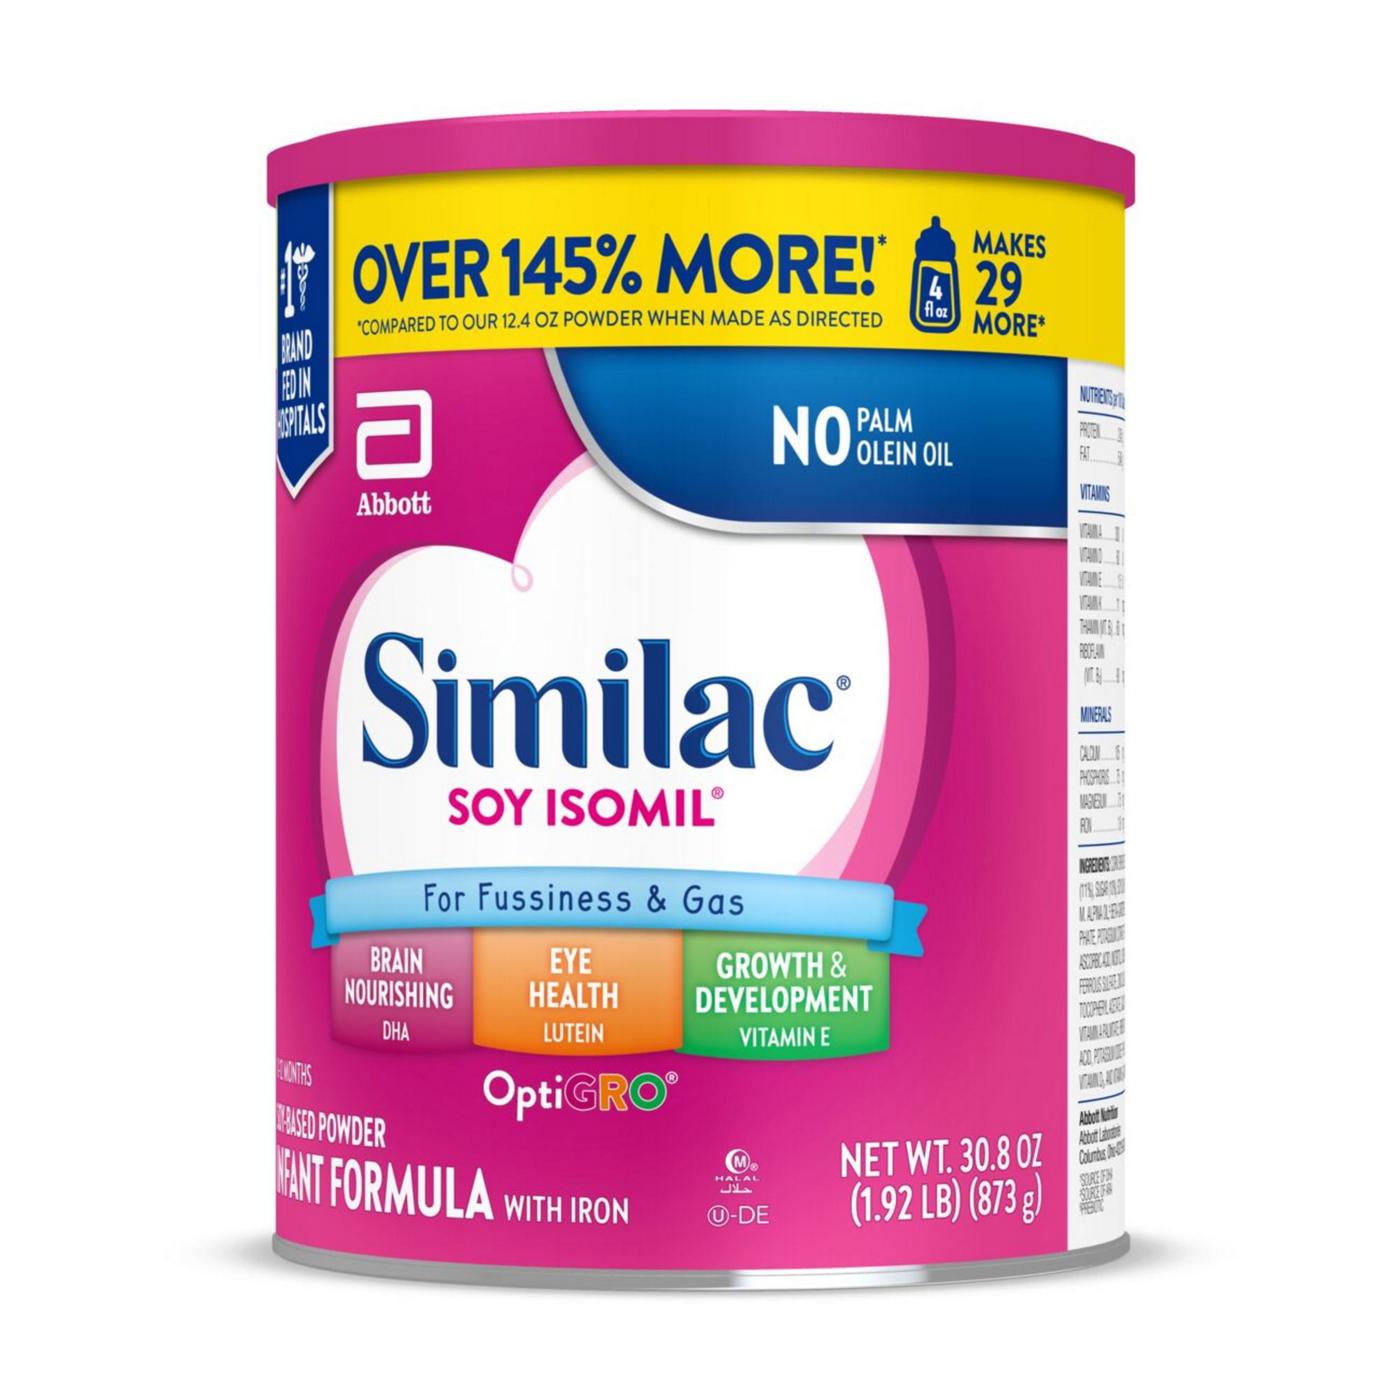 Similac Soy Isomil For Fussiness and Gas Infant Formula with Iron Powder; image 8 of 9